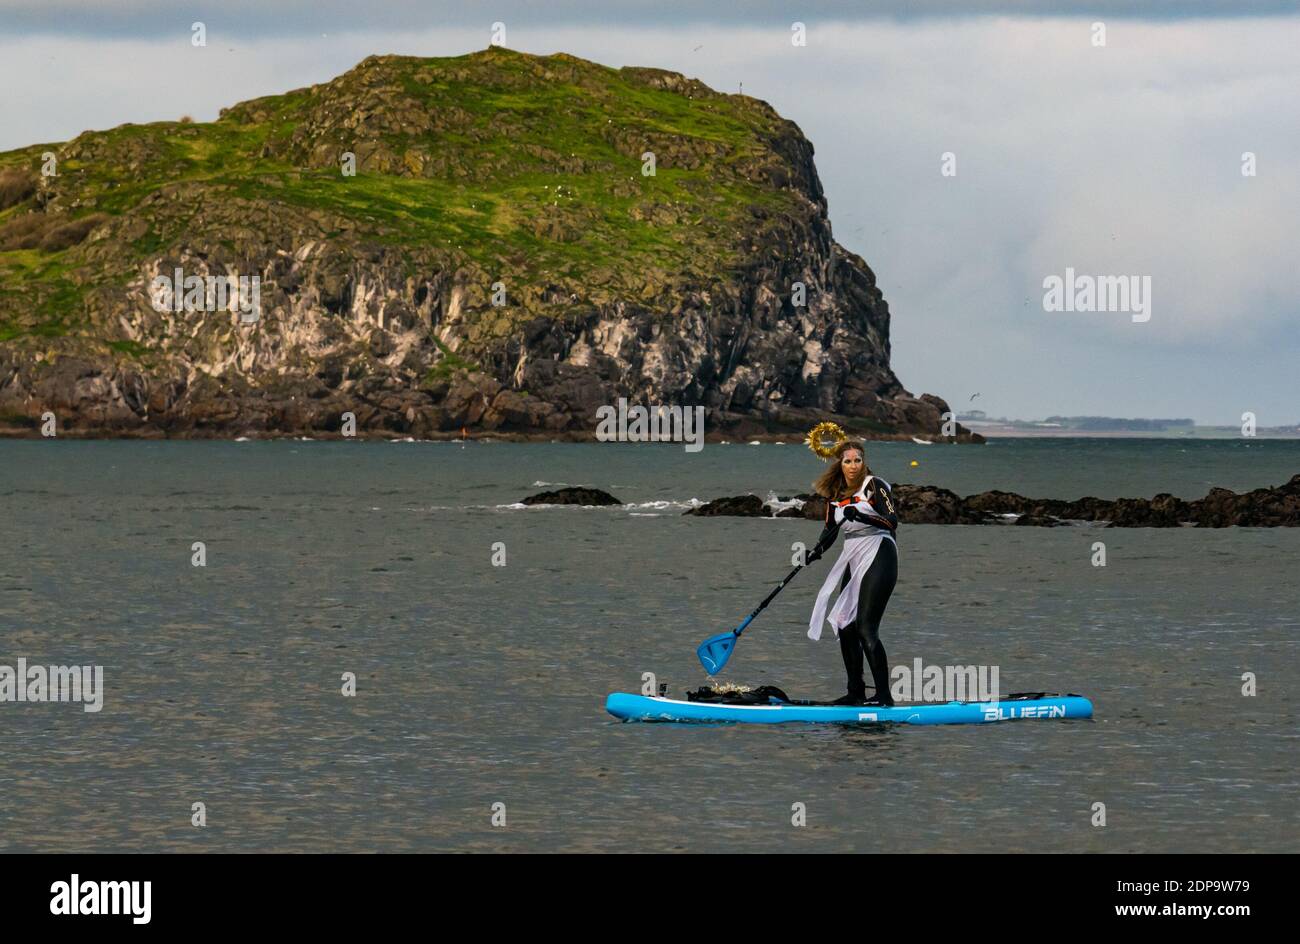 North Berwick, East Lothian, Scotland, United Kingdom, 19th December 2020. Paddle Boarding Santas for charity: a local community initiative by North Berwick News and Views called 'Christmas Cheer' raises over £5,000 funds for families in need. A paddle boarder wearing a festive angel costume Stock Photo